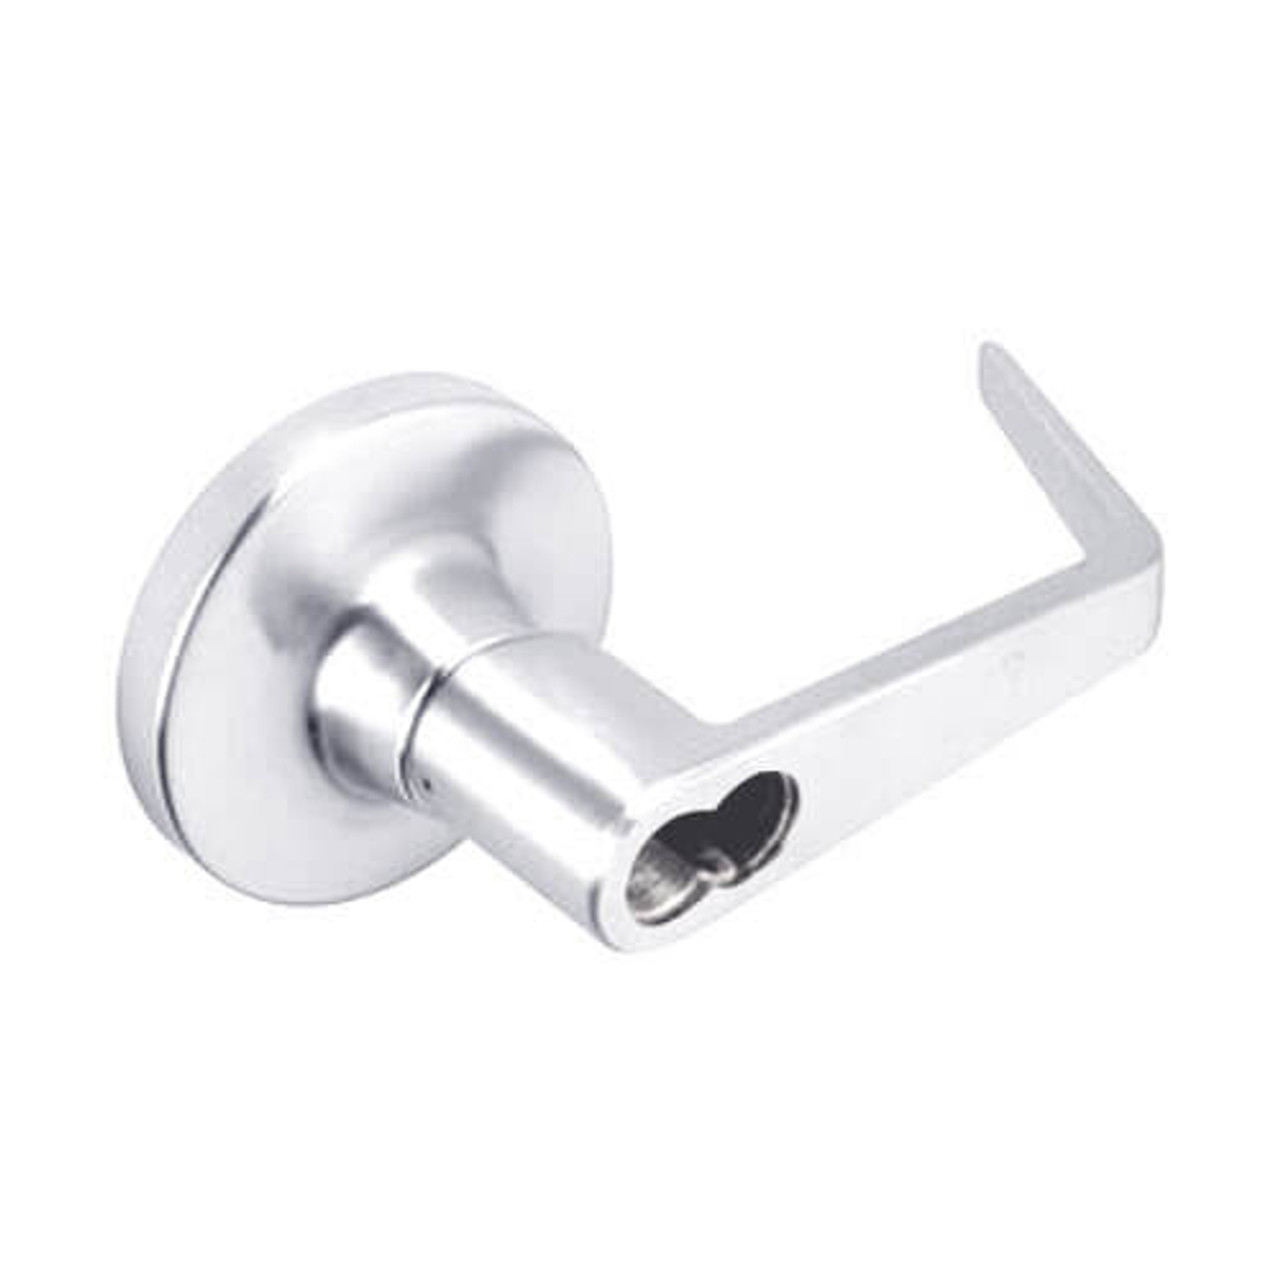 MA541BD-DG-625 Falcon Mortise Locks MA Series Entry/Office with DG Lever in Bright Chrome Finish